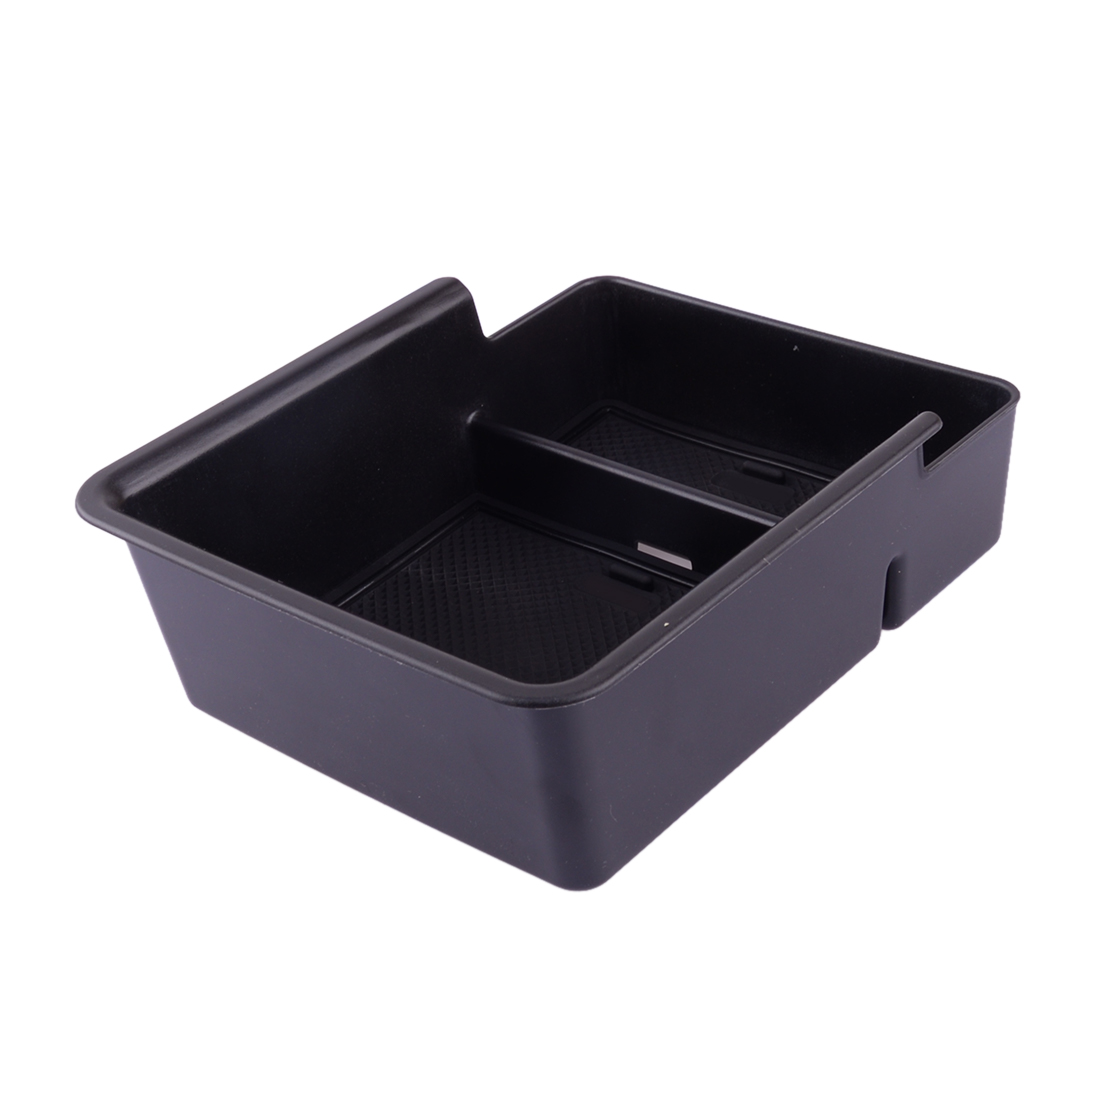 MG4 storage box in the cup holder